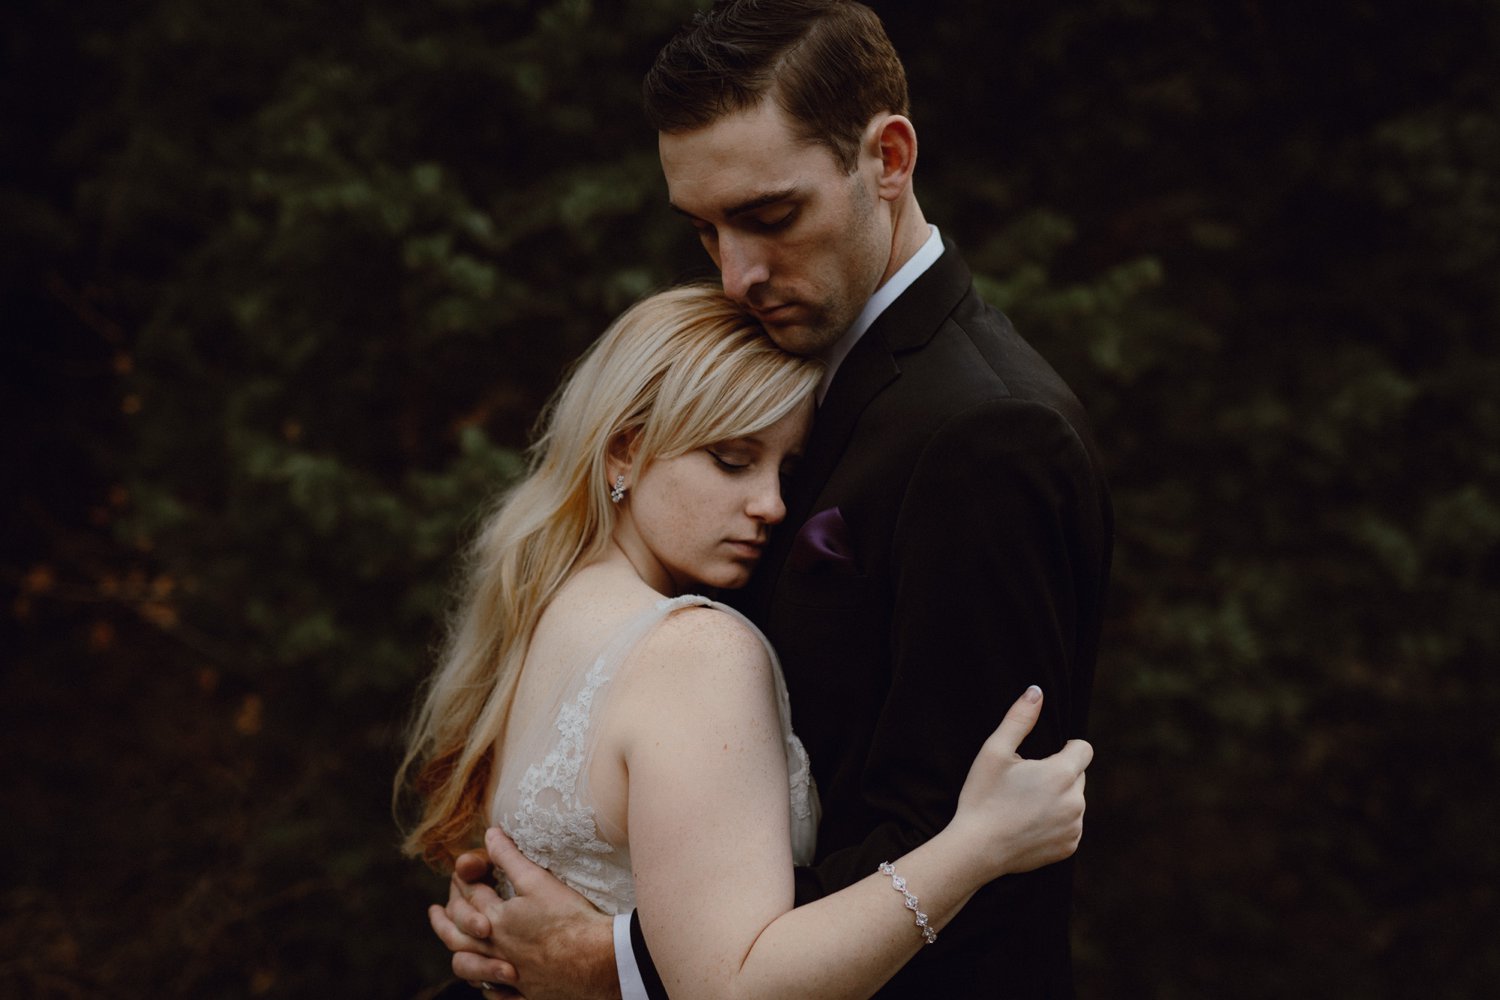 A bride and groom embrace during their wedding portraits